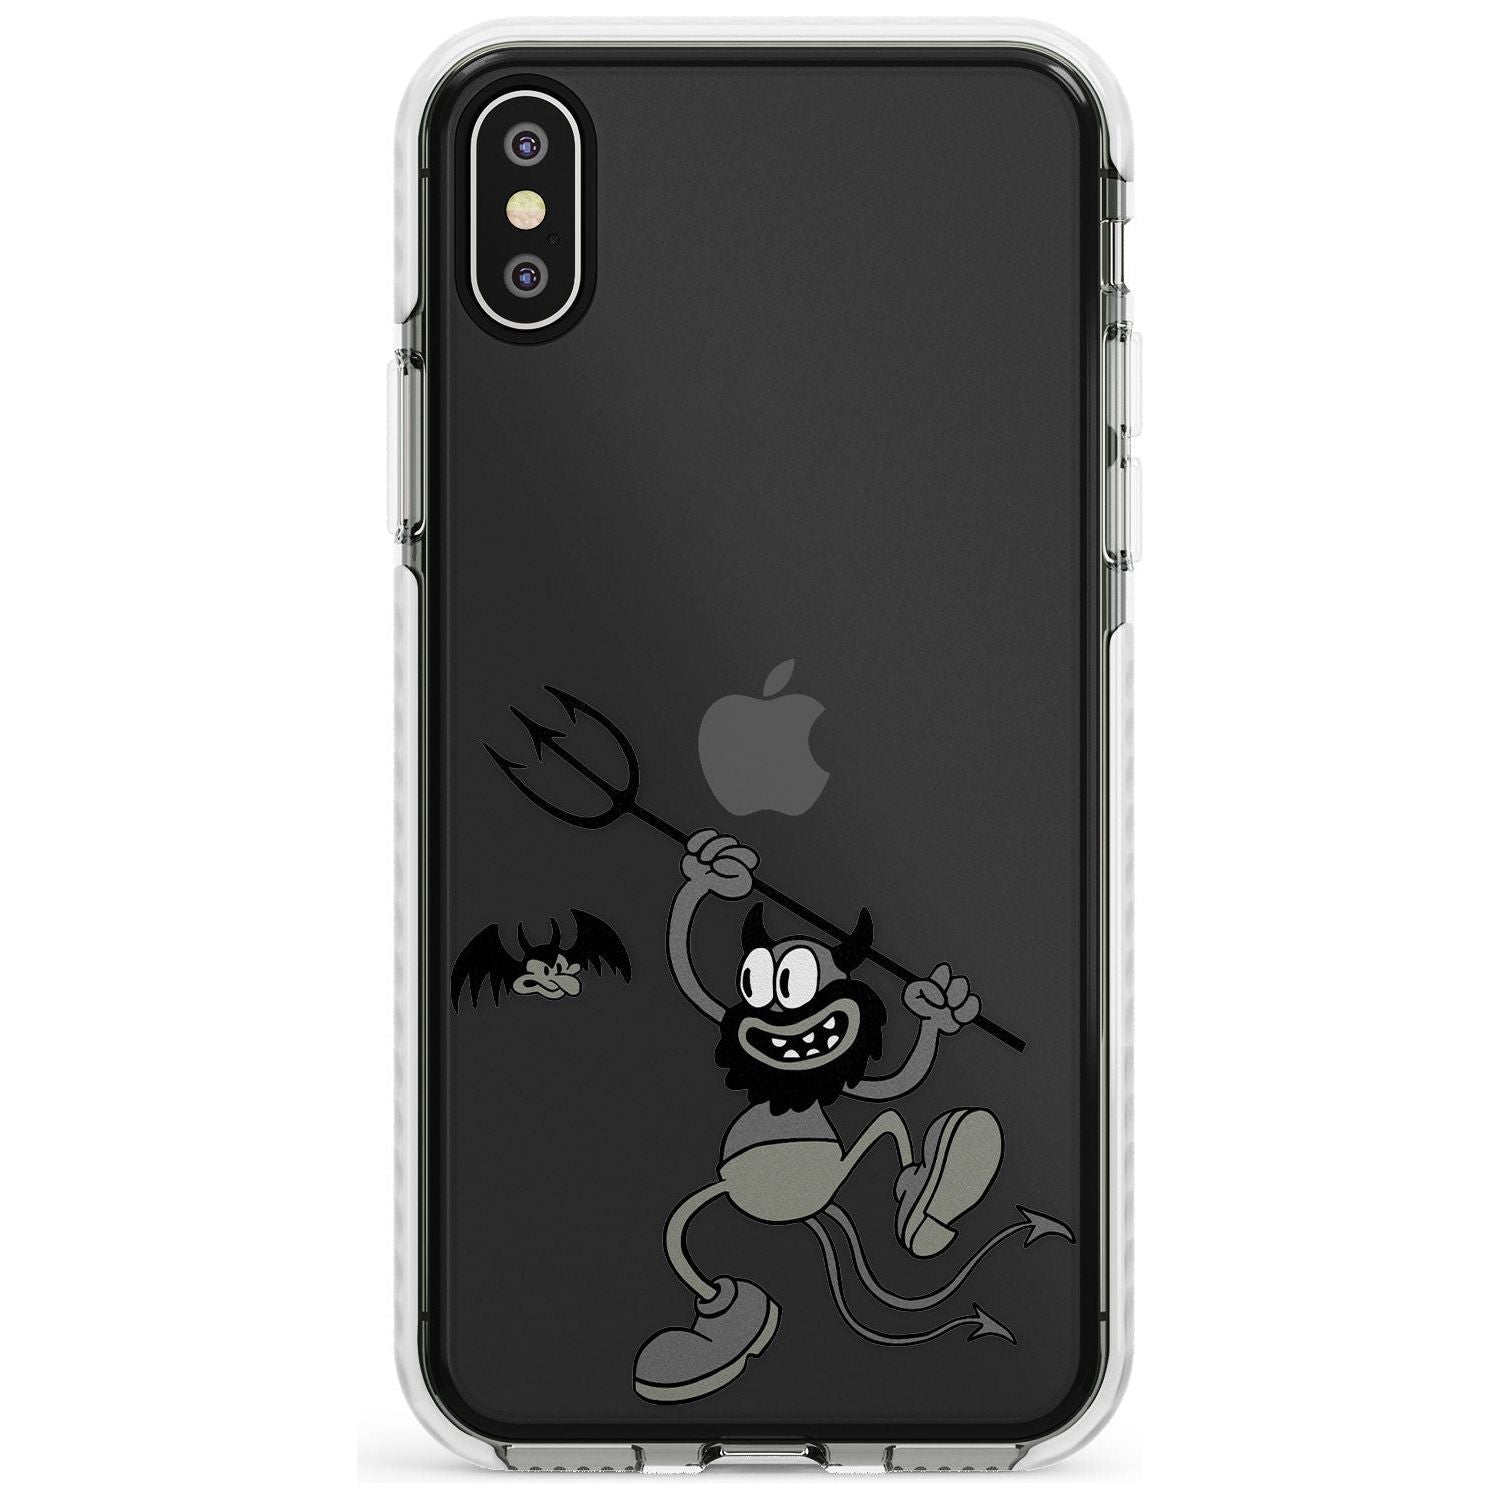 Dancing Devil Impact Phone Case for iPhone X XS Max XR